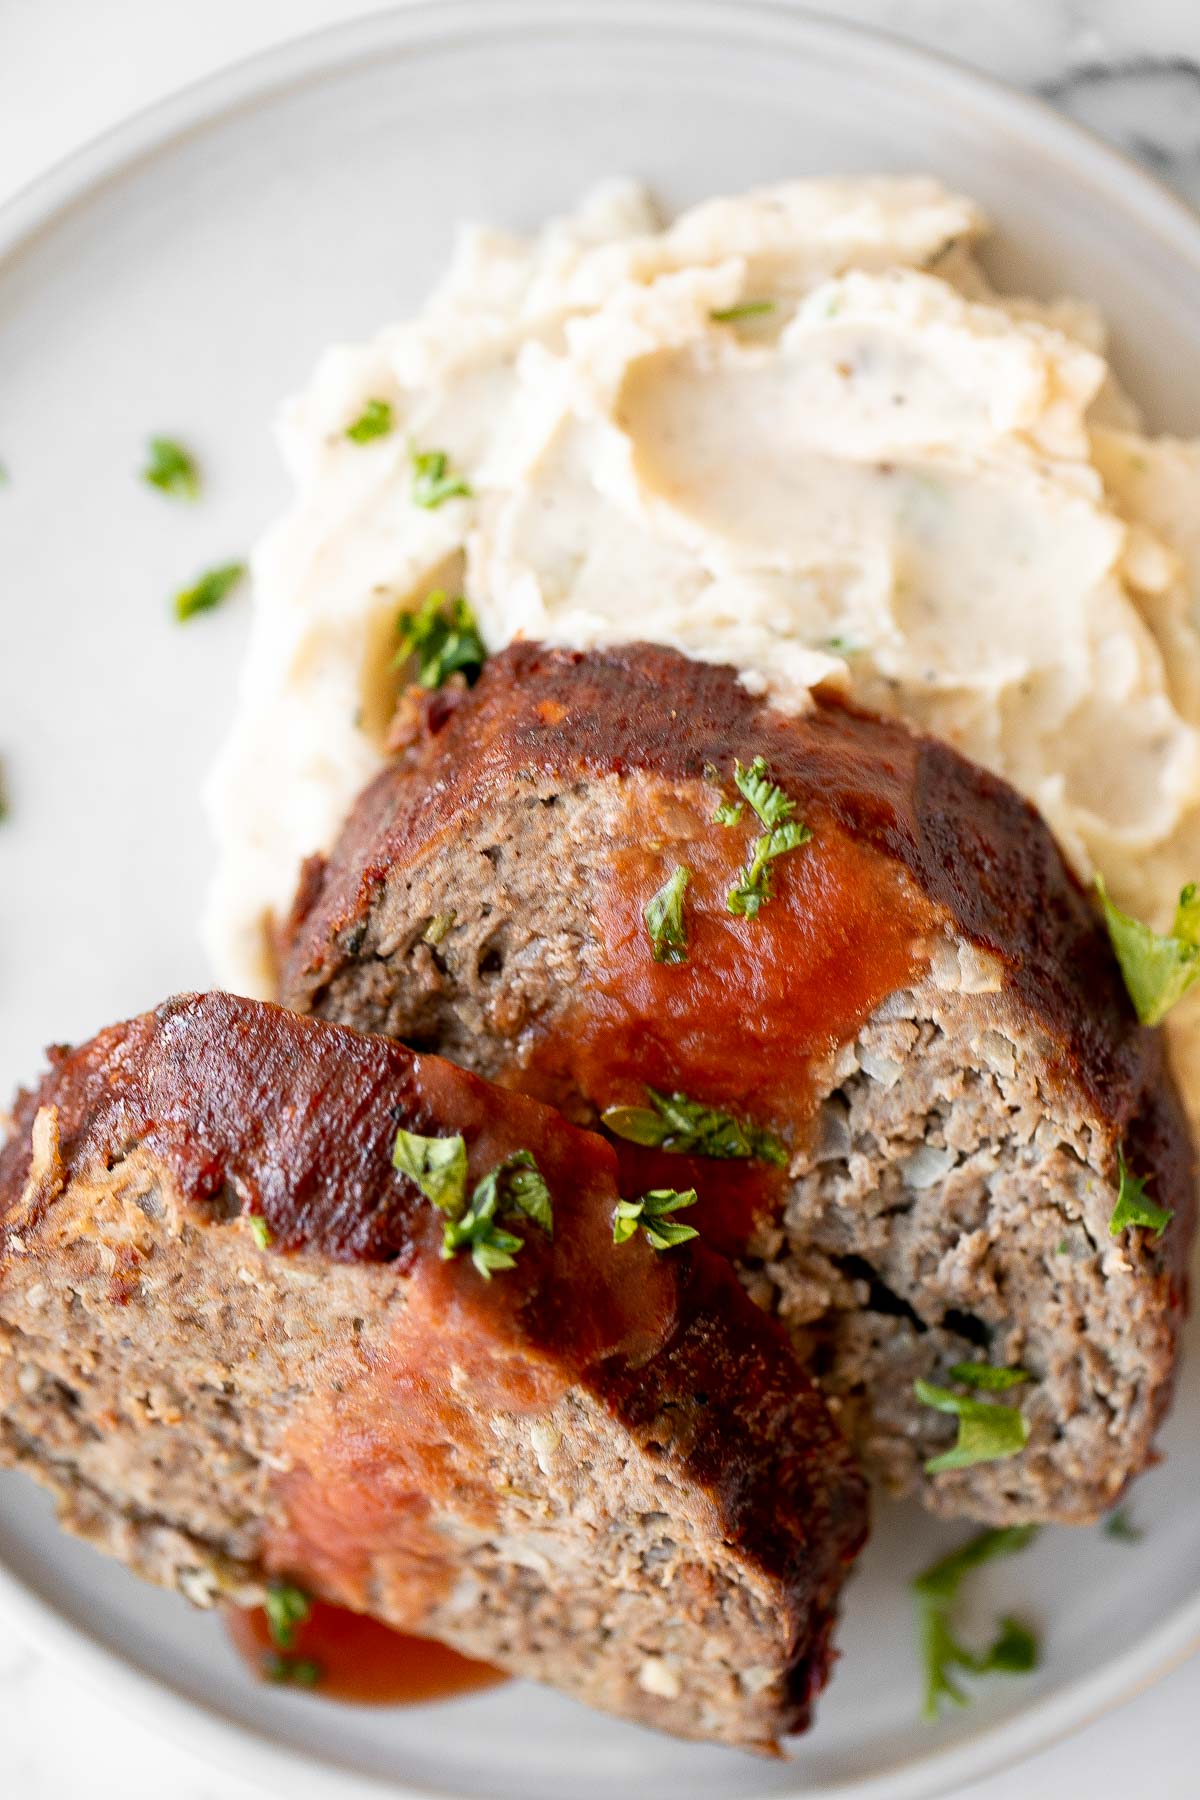 This hearty classic meatloaf with a caramelized glaze will nourish your body and soul. Feed the whole family with a simple yet flavourful classic. | aheadofthyme.com